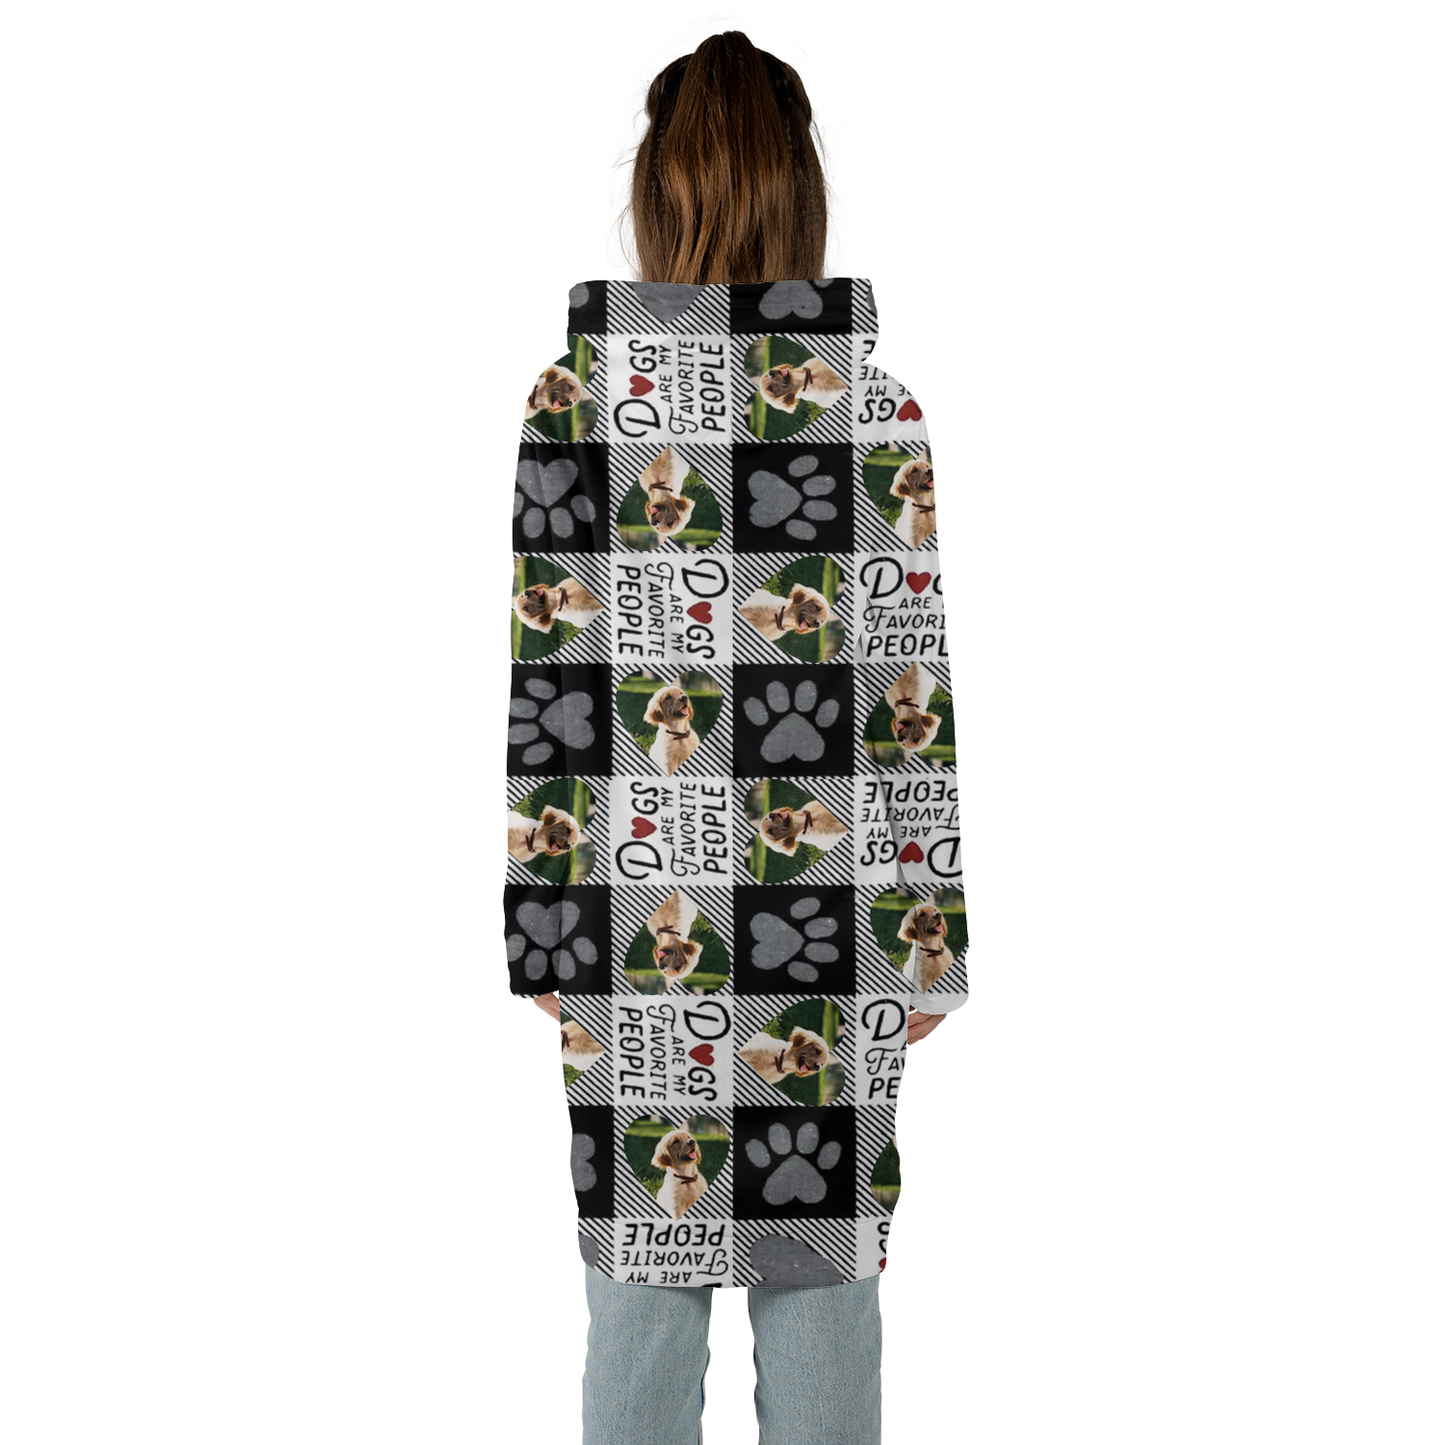 Dogs Are My Favorite People Put Your Dog Photo on All-Over Print Hoodie Dress